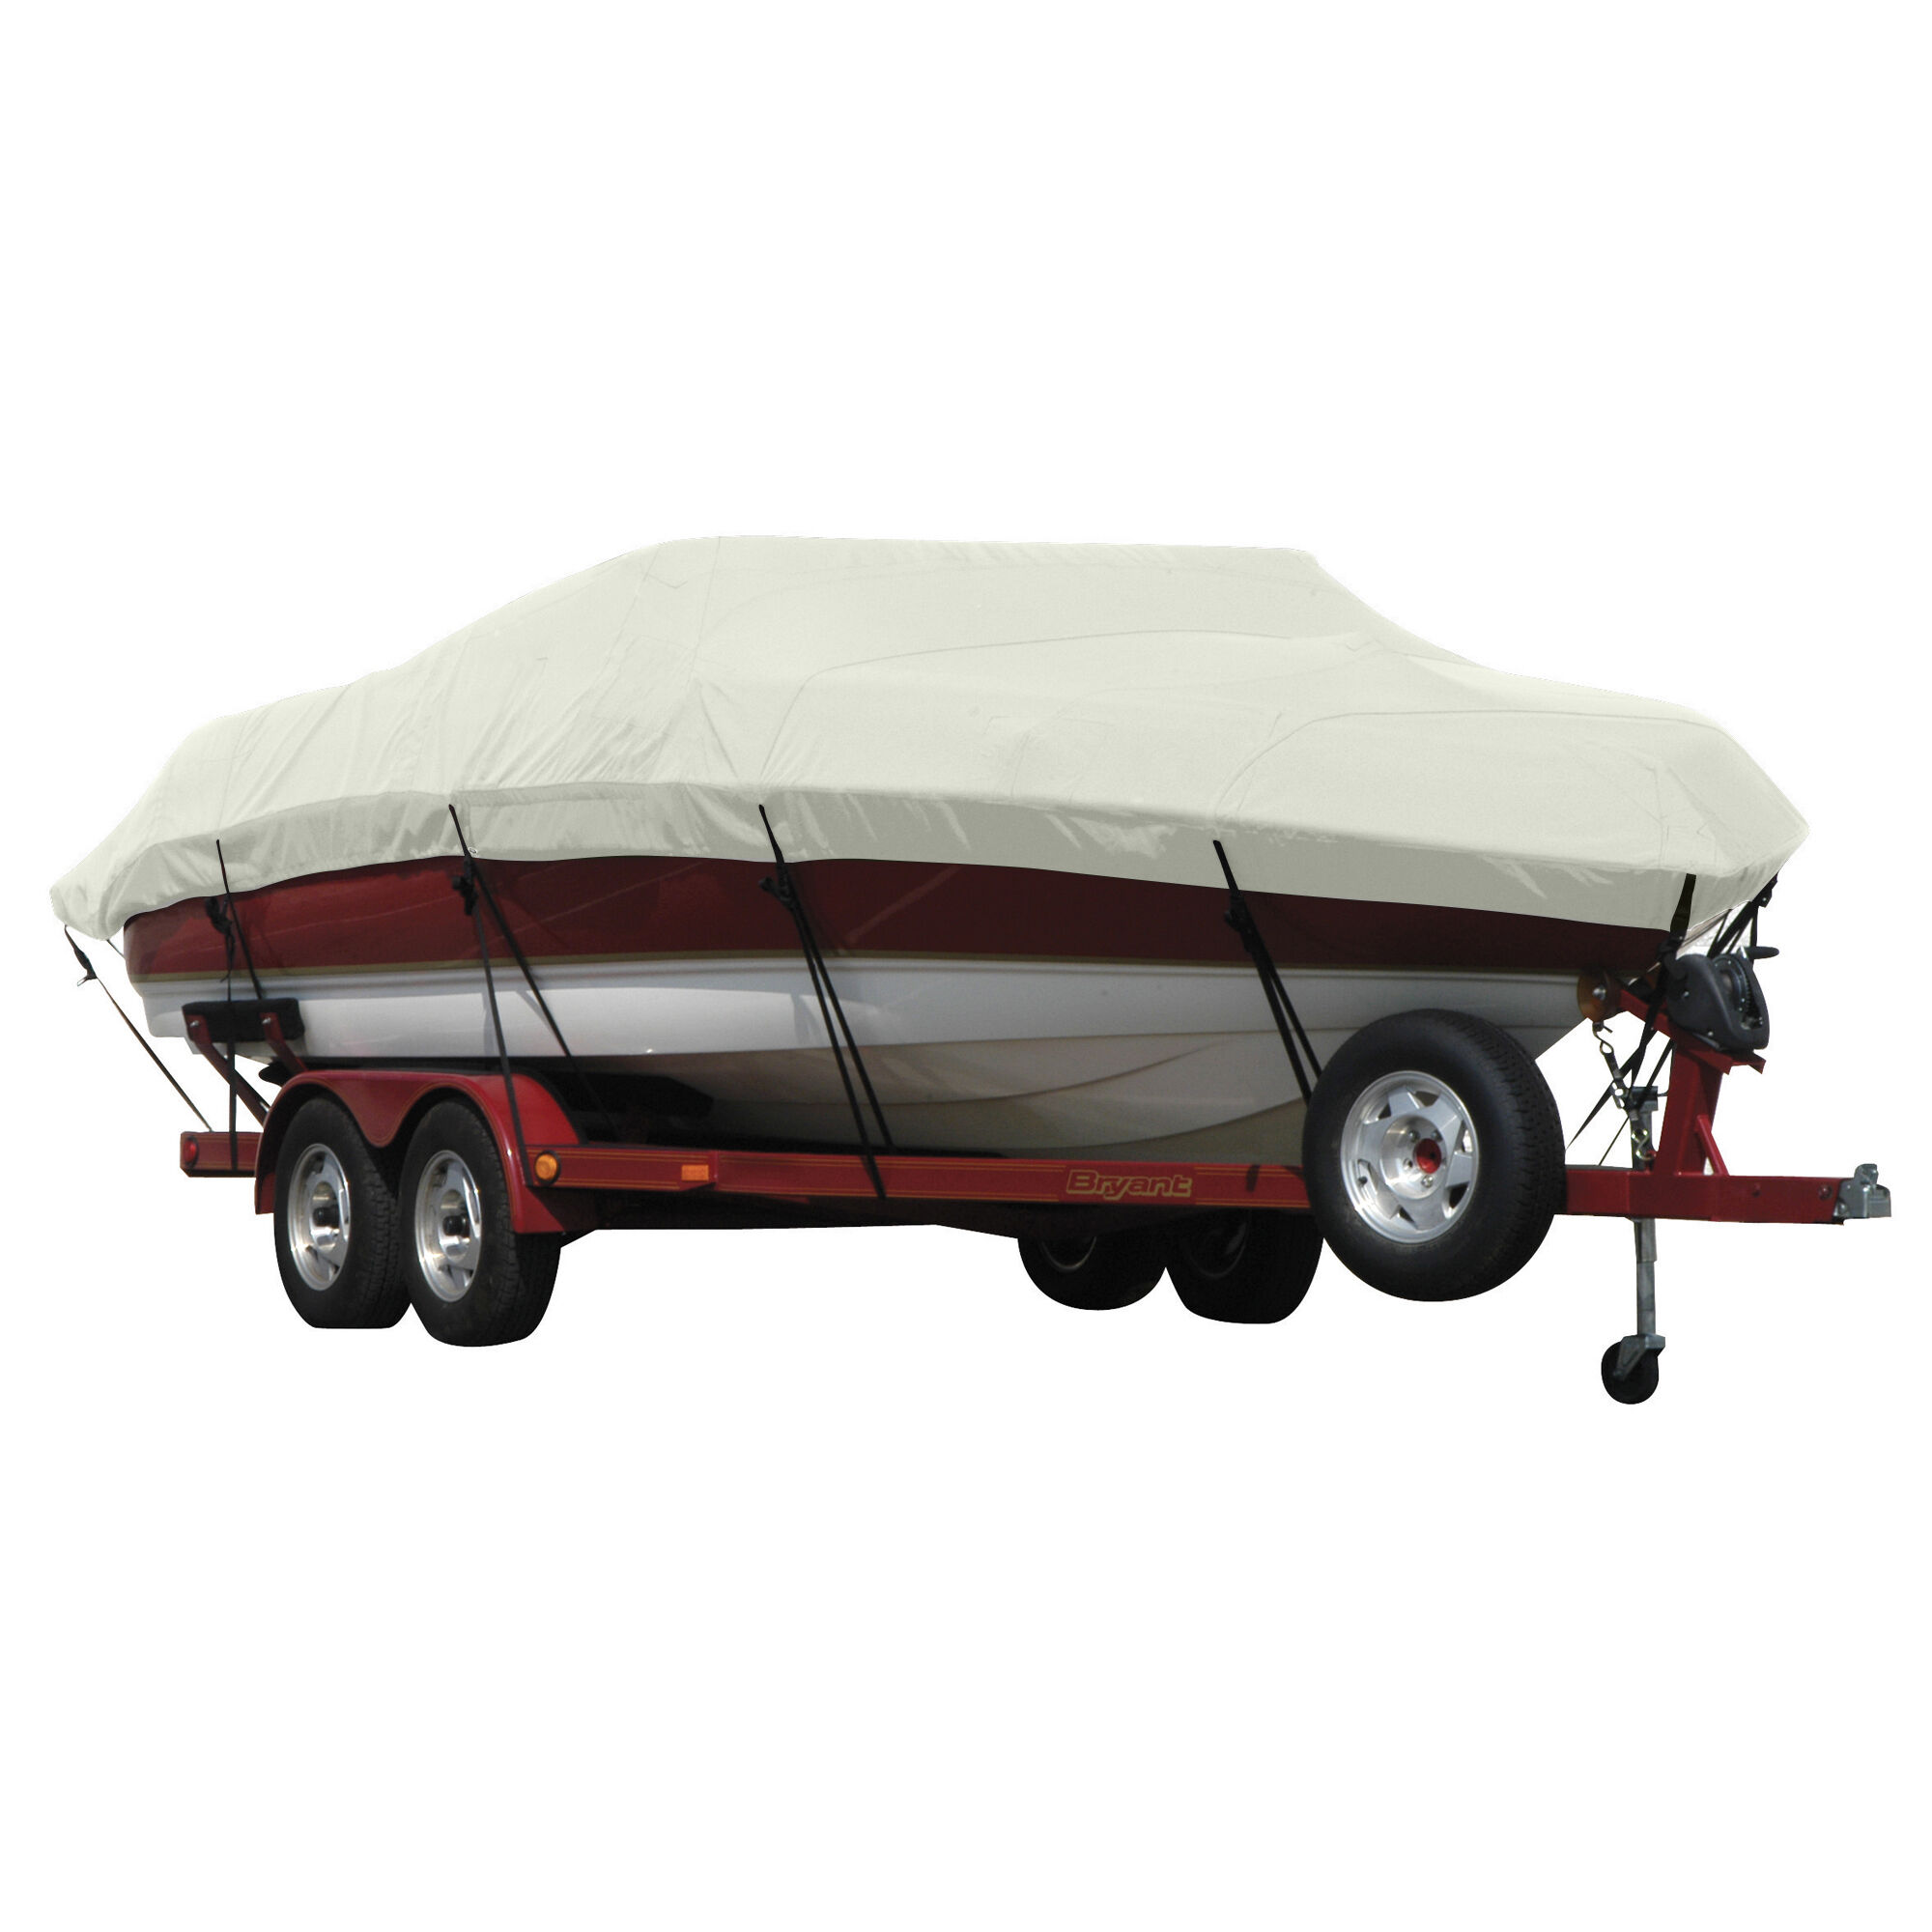 Covermate Exact Fit Sunbrella Boat Cover for Supreme 19 Cs 19 Cs Does Not Cover PLATFORMm. Silver